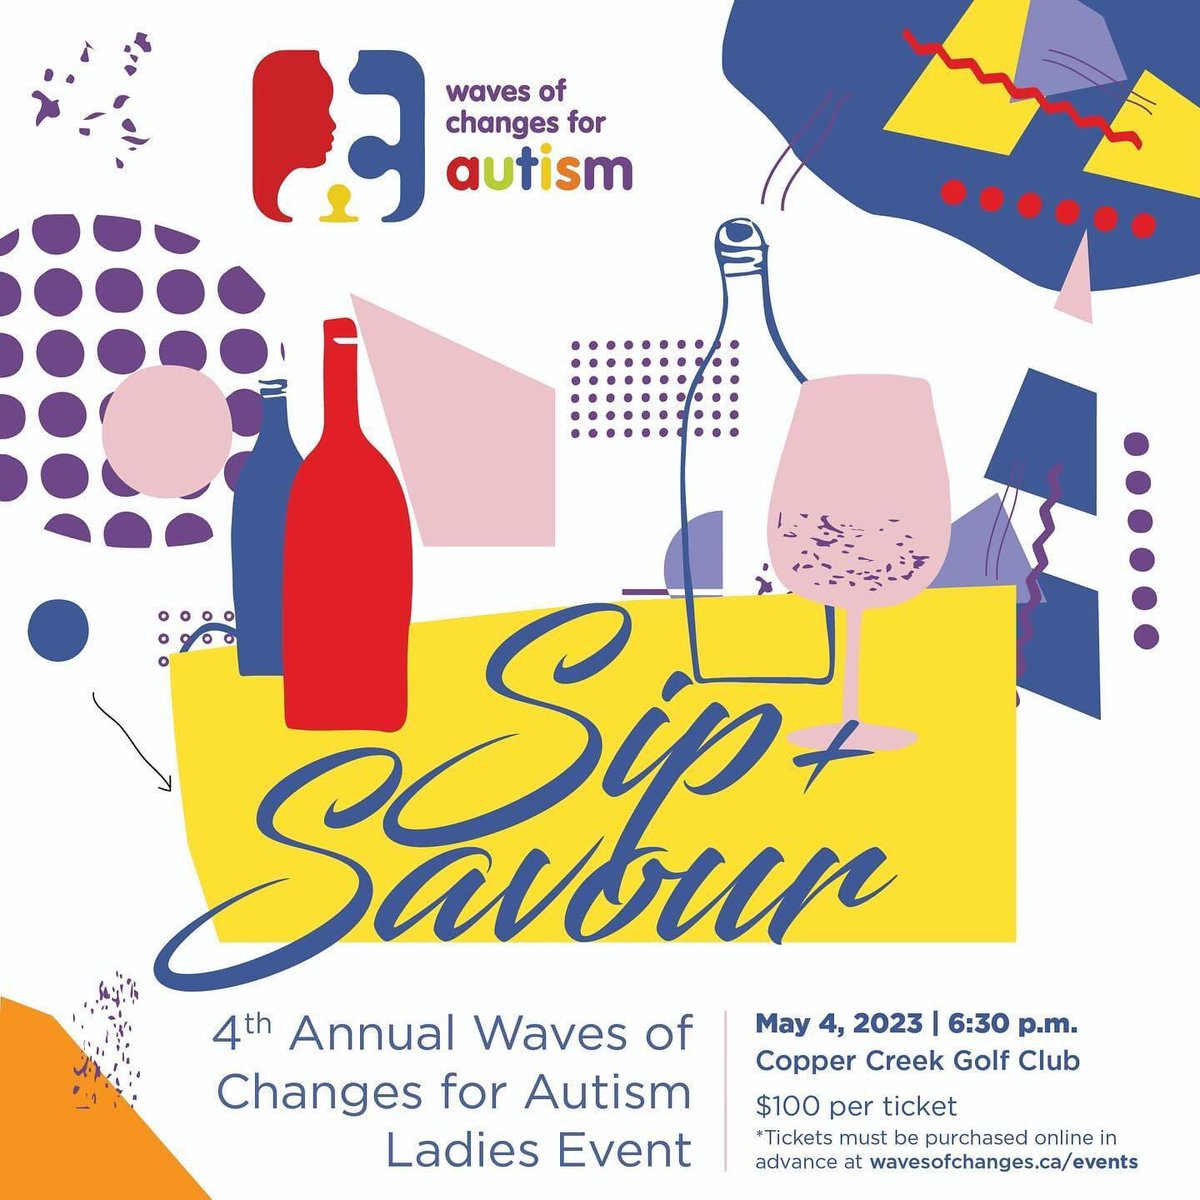 4th Annual Sip & Savour Ladies Night on May 4th! 

Purchase tickets online in at wavesofchanges.ca/events

#Autism #AutismAwareness #WavesOfChanges #WavesOfChangesForAutism #Wine #SipAndSavour #CopperCreekGolfClub #CopperCreek